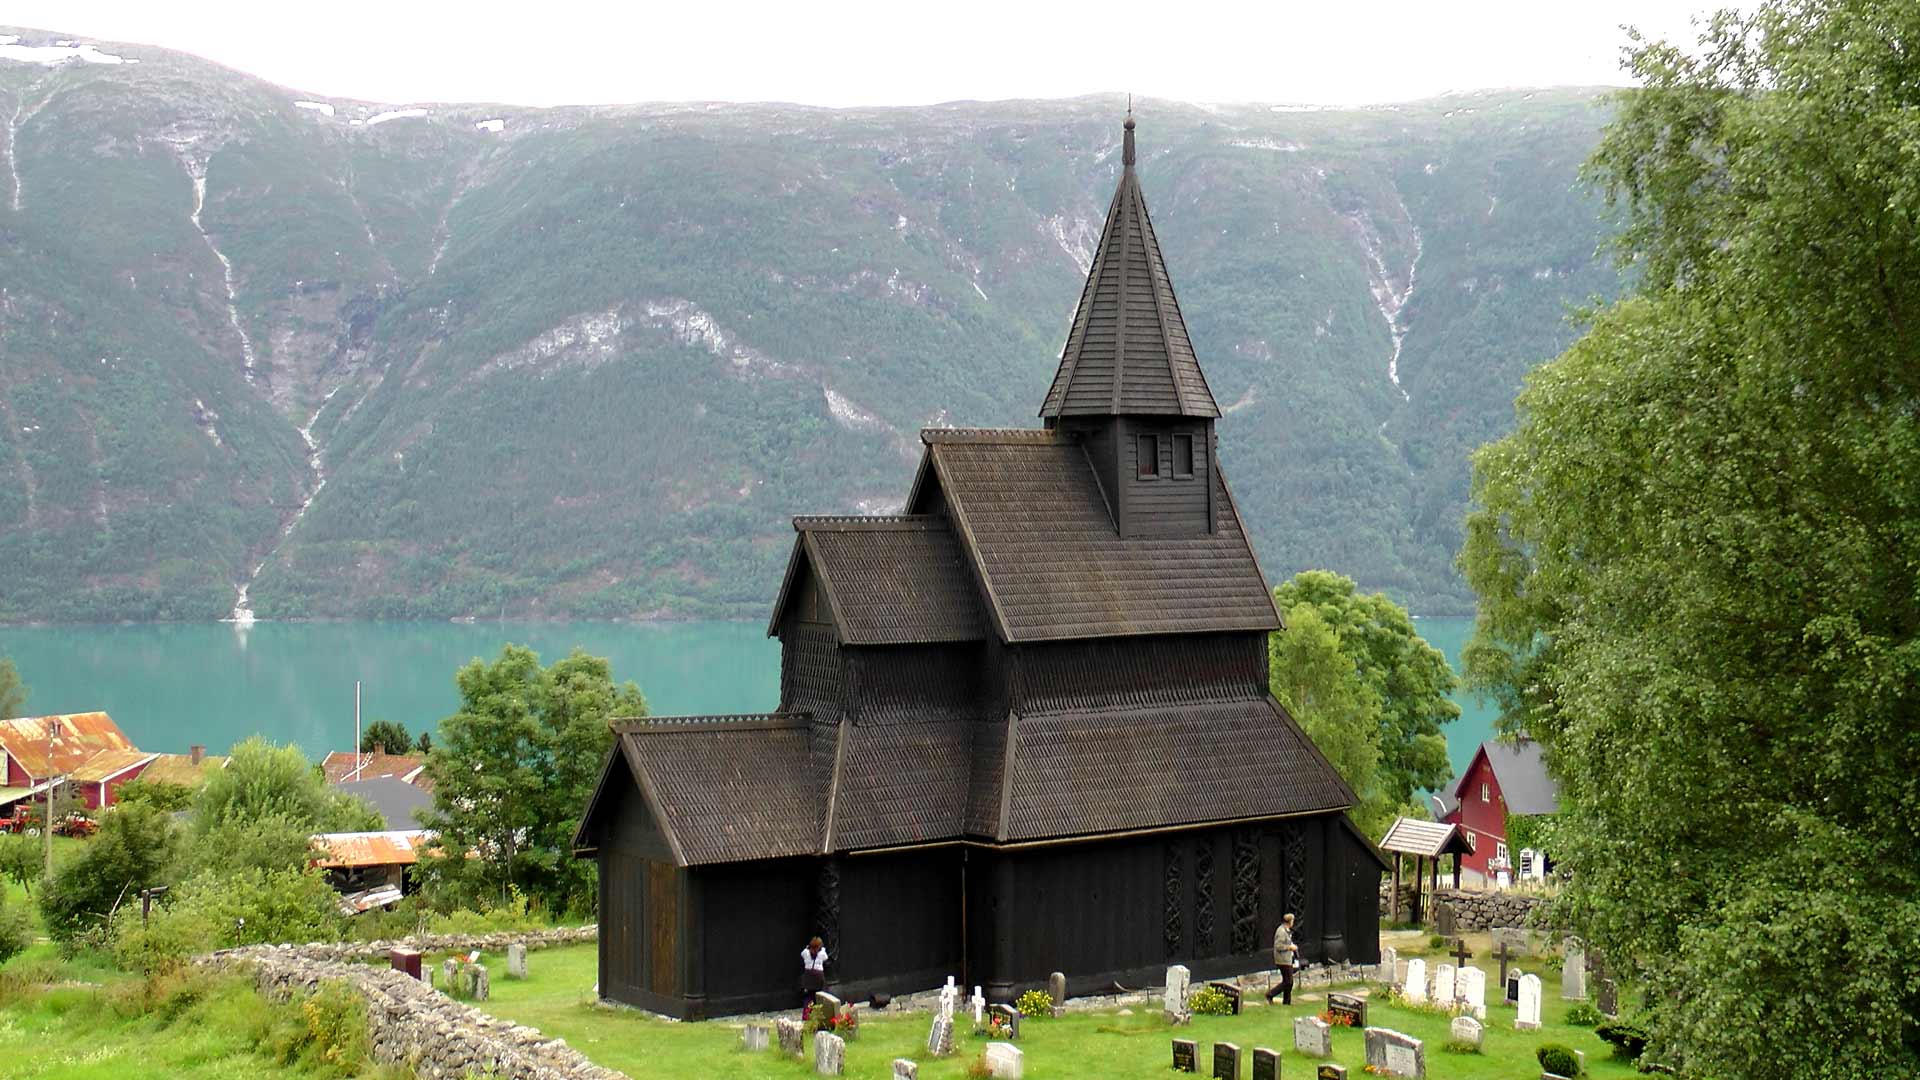 Urnes stave church, one of the World Heritage Sites in Norway